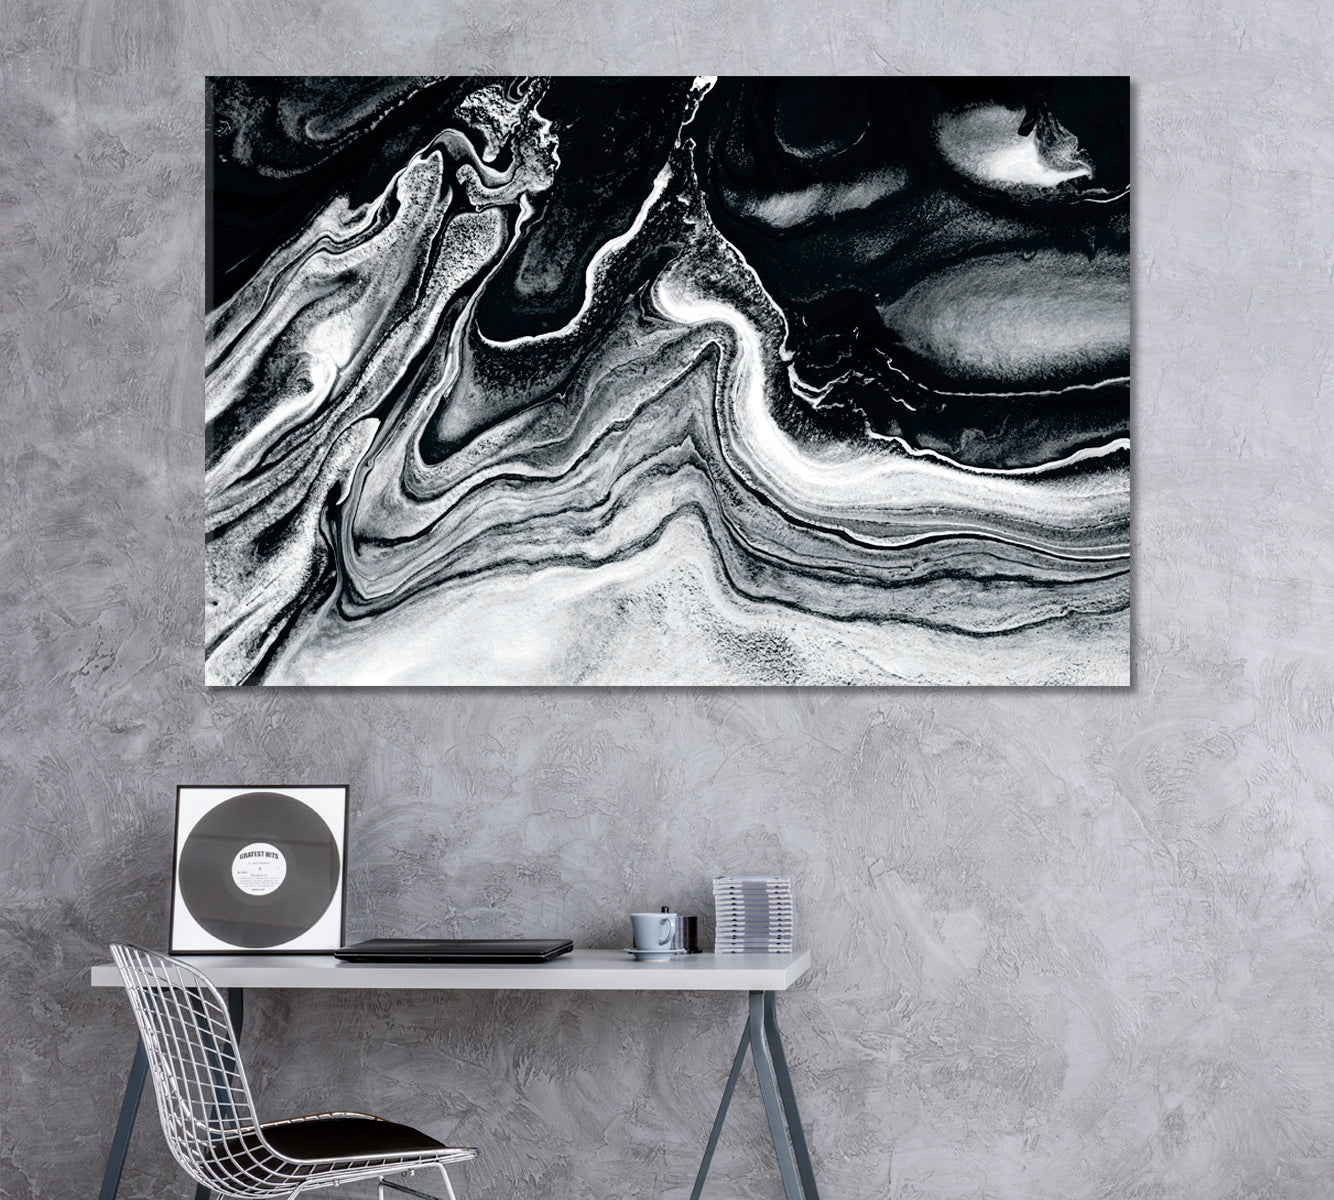 Abstract Black and White Wavy Marble Canvas Print ArtLexy 1 Panel 24"x16" inches 